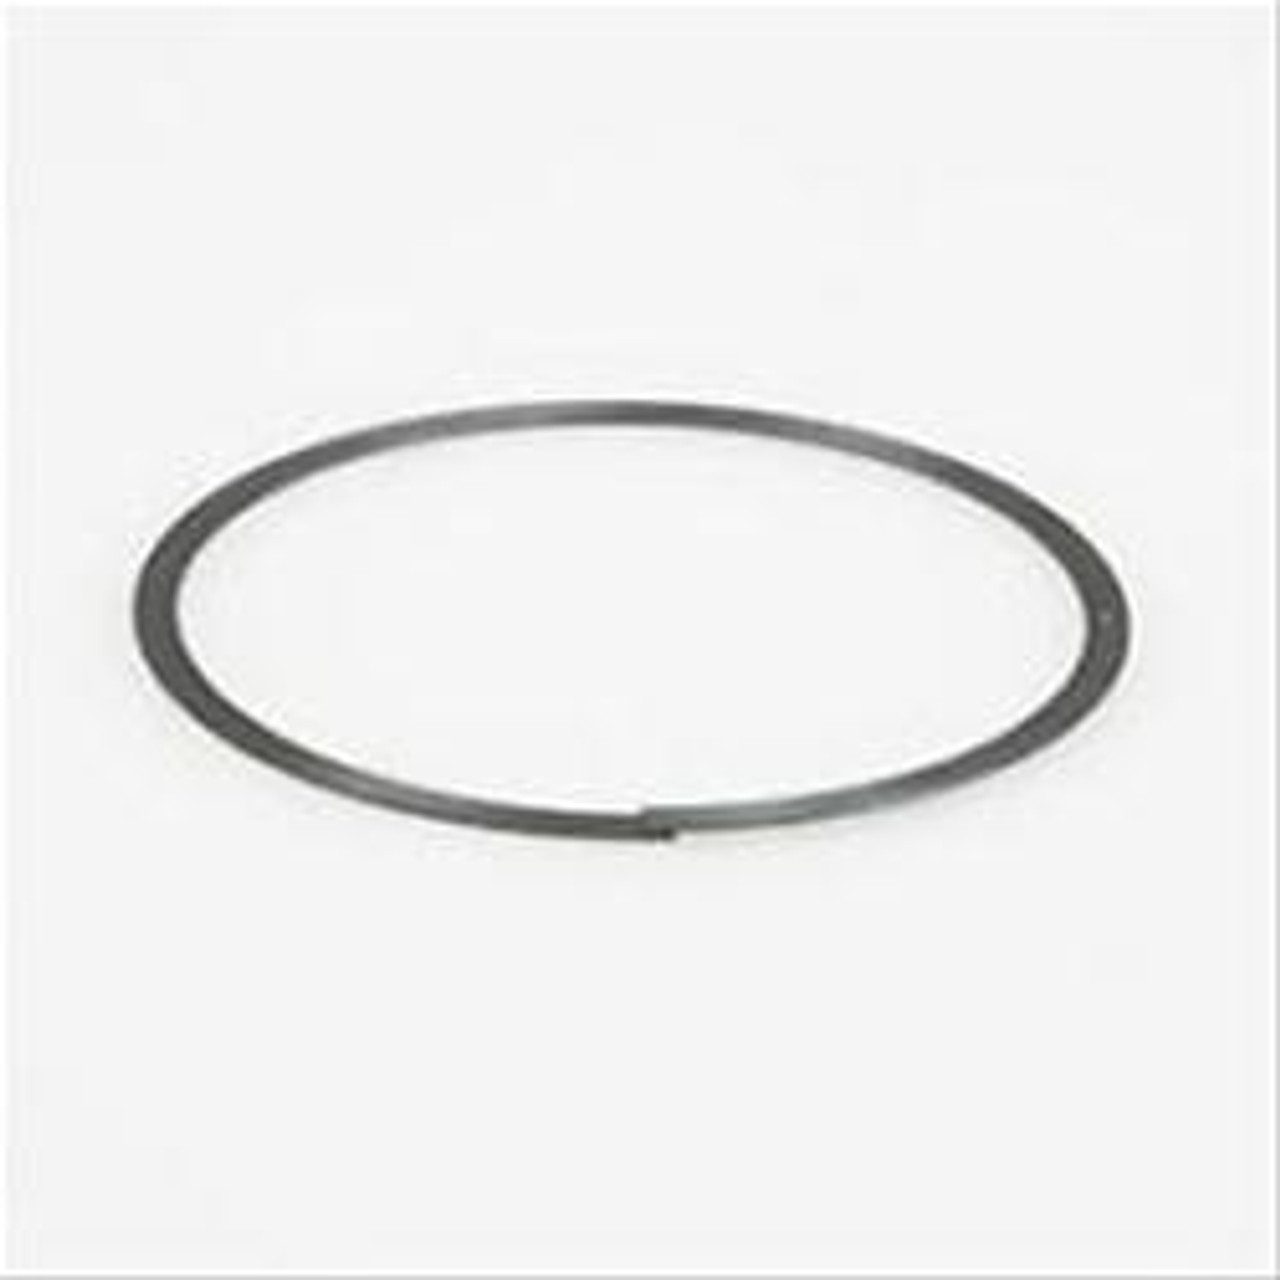 3.2mm Thick Powder Coated Cast Iron Piston Ring For Compressor Use at  2025.00 INR in Nashik | Shri Gajanan Industries